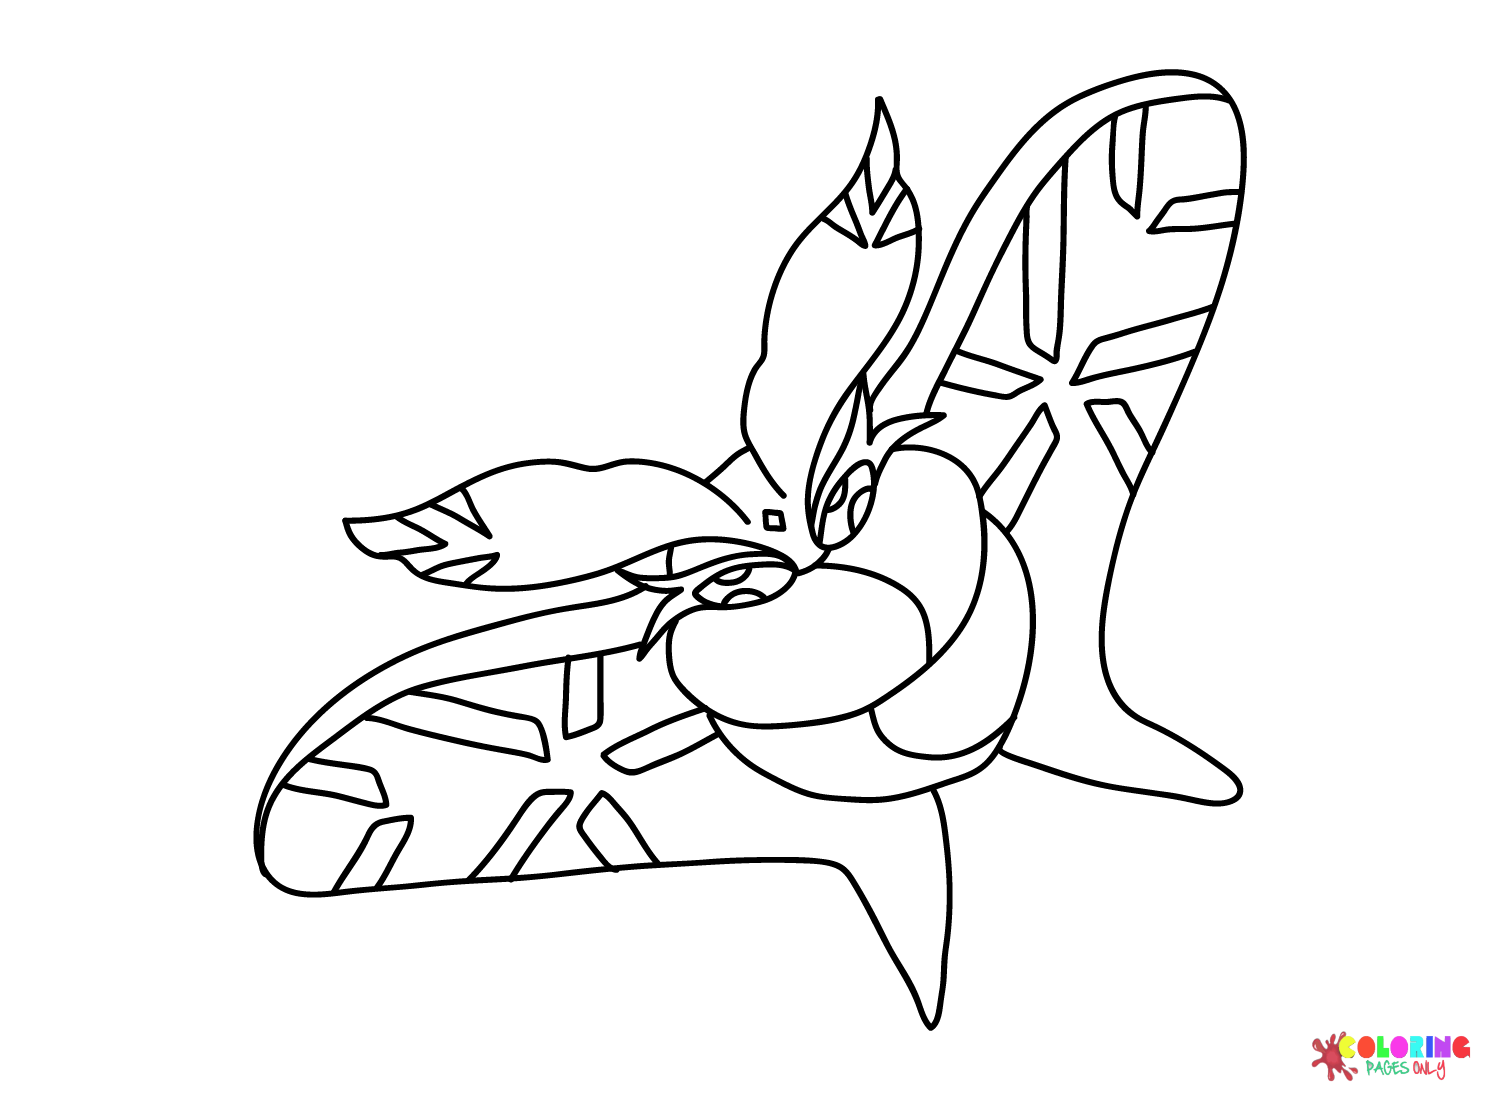 The Frosmoth from Pokemon Coloring Page